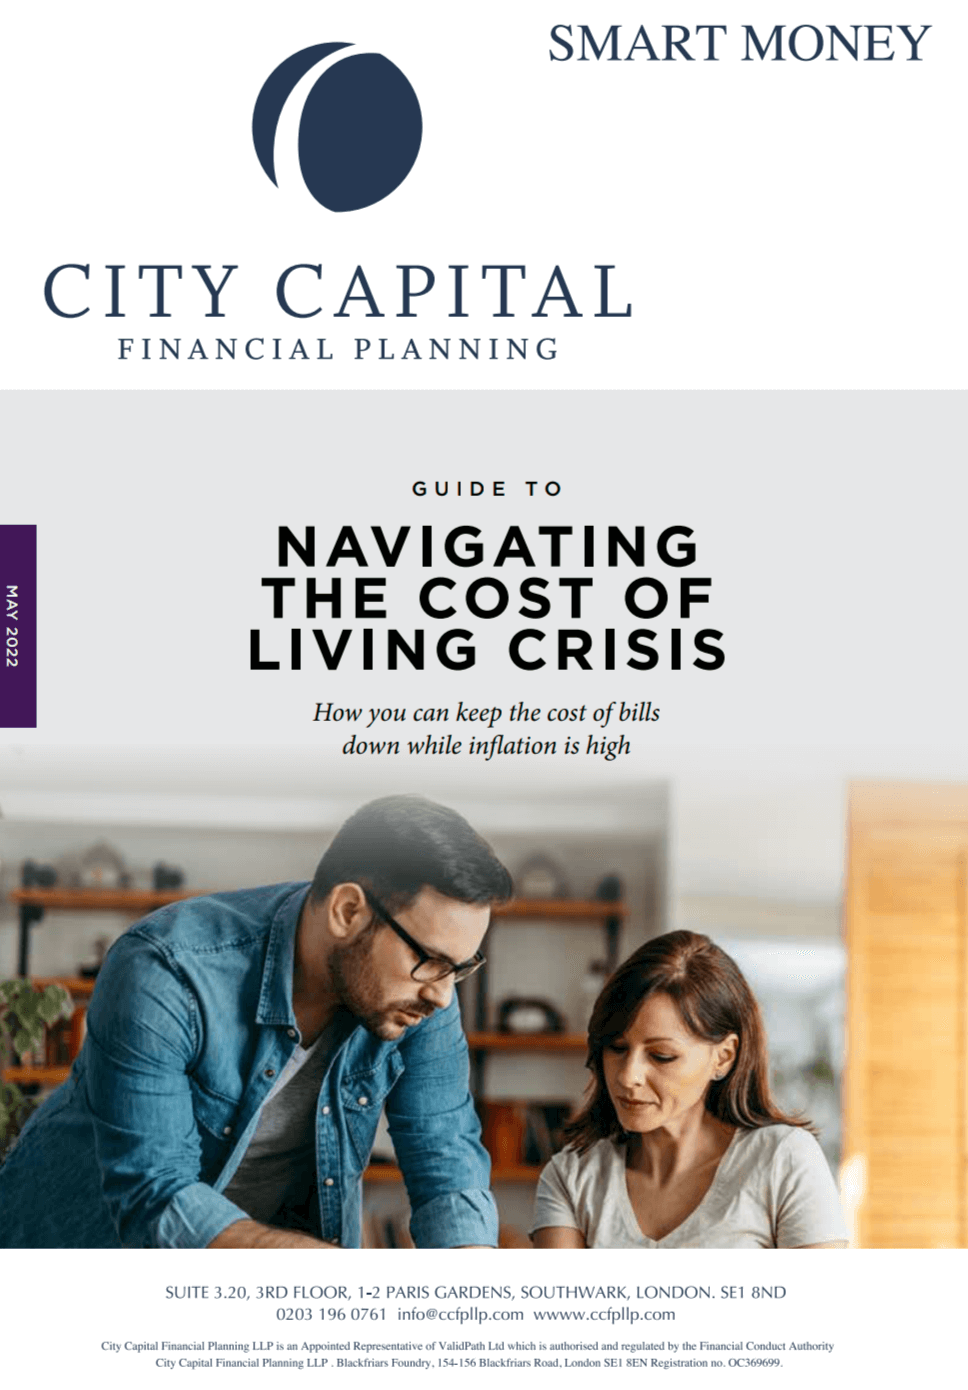 Guide to Navigating the Cost of Living Crisis